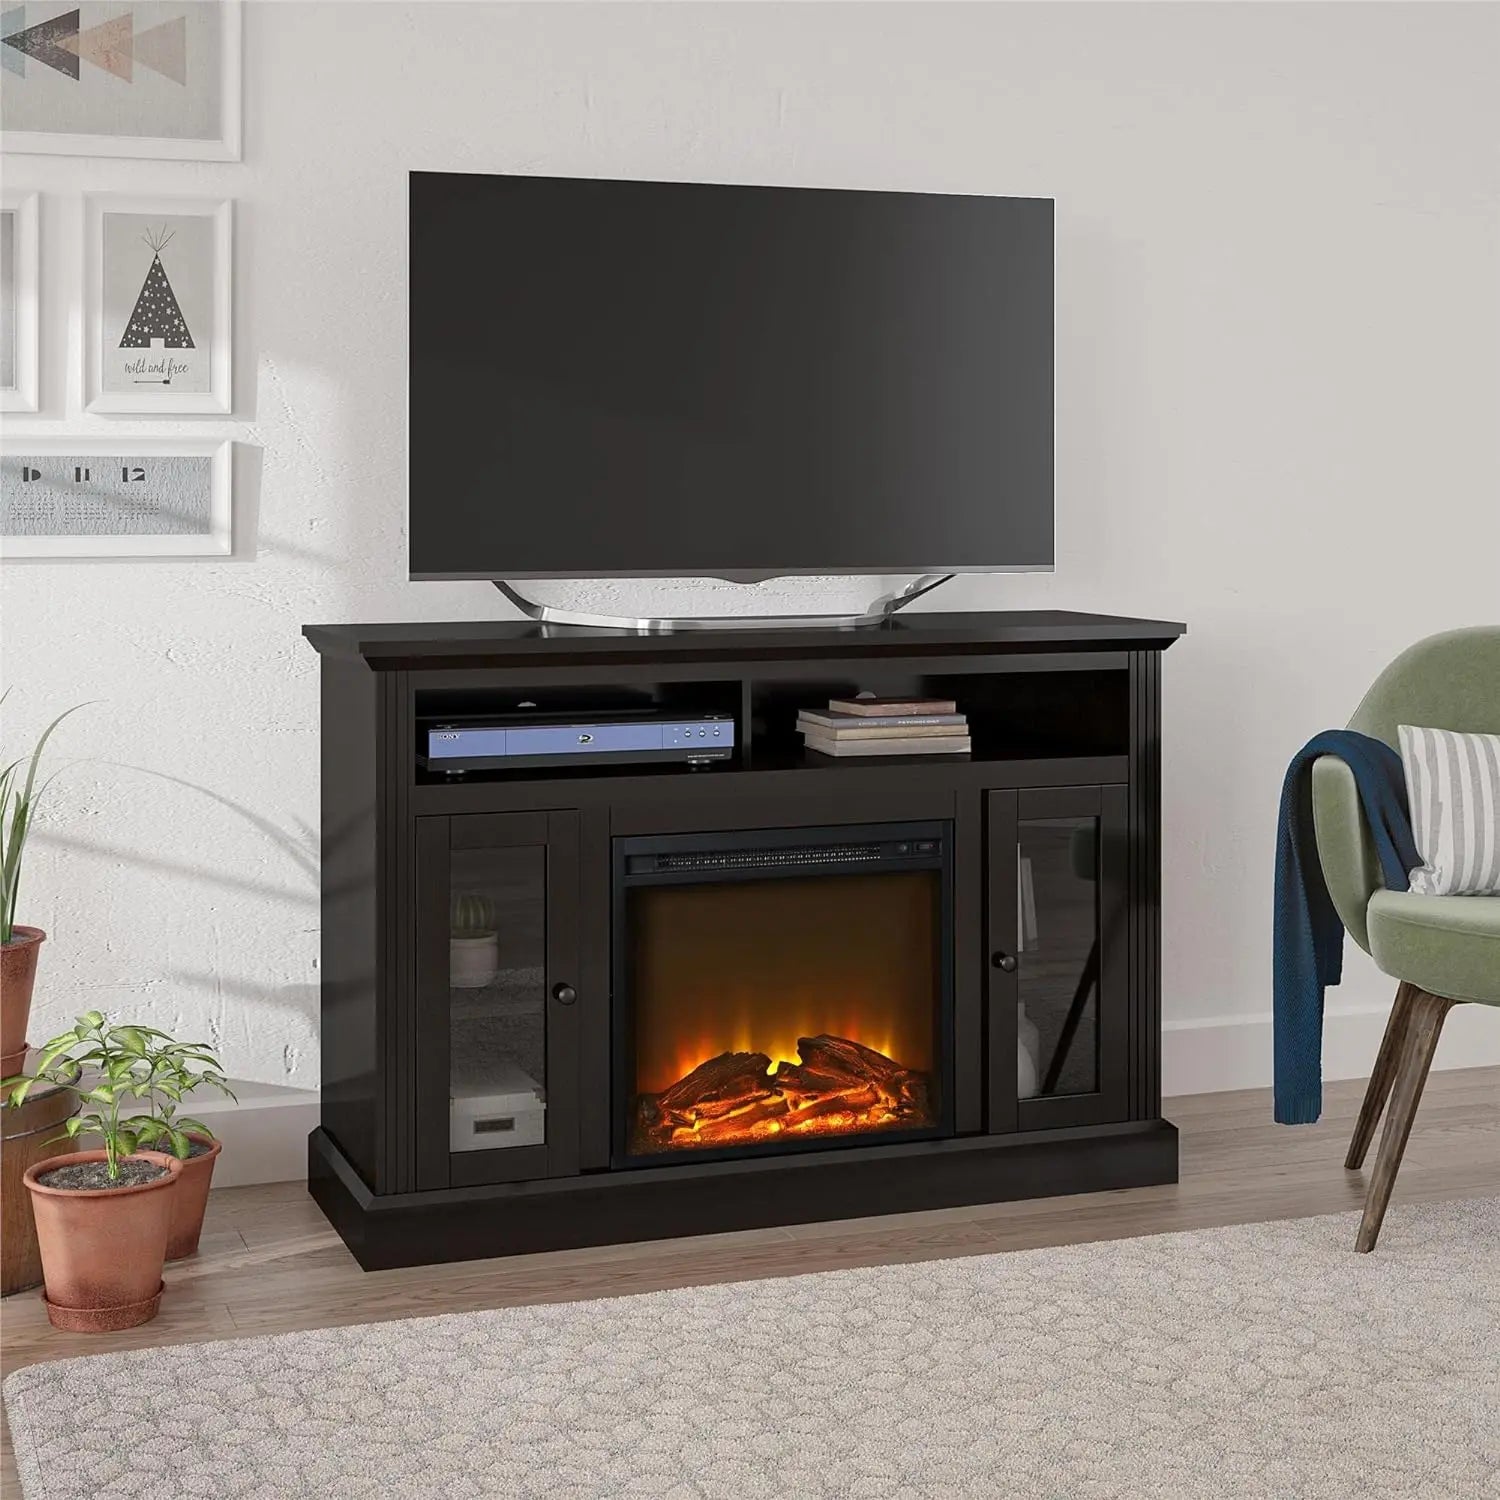 Ameriwood Home Chicago Electric Fireplace TV Console for TVs up to a 50", Espresso